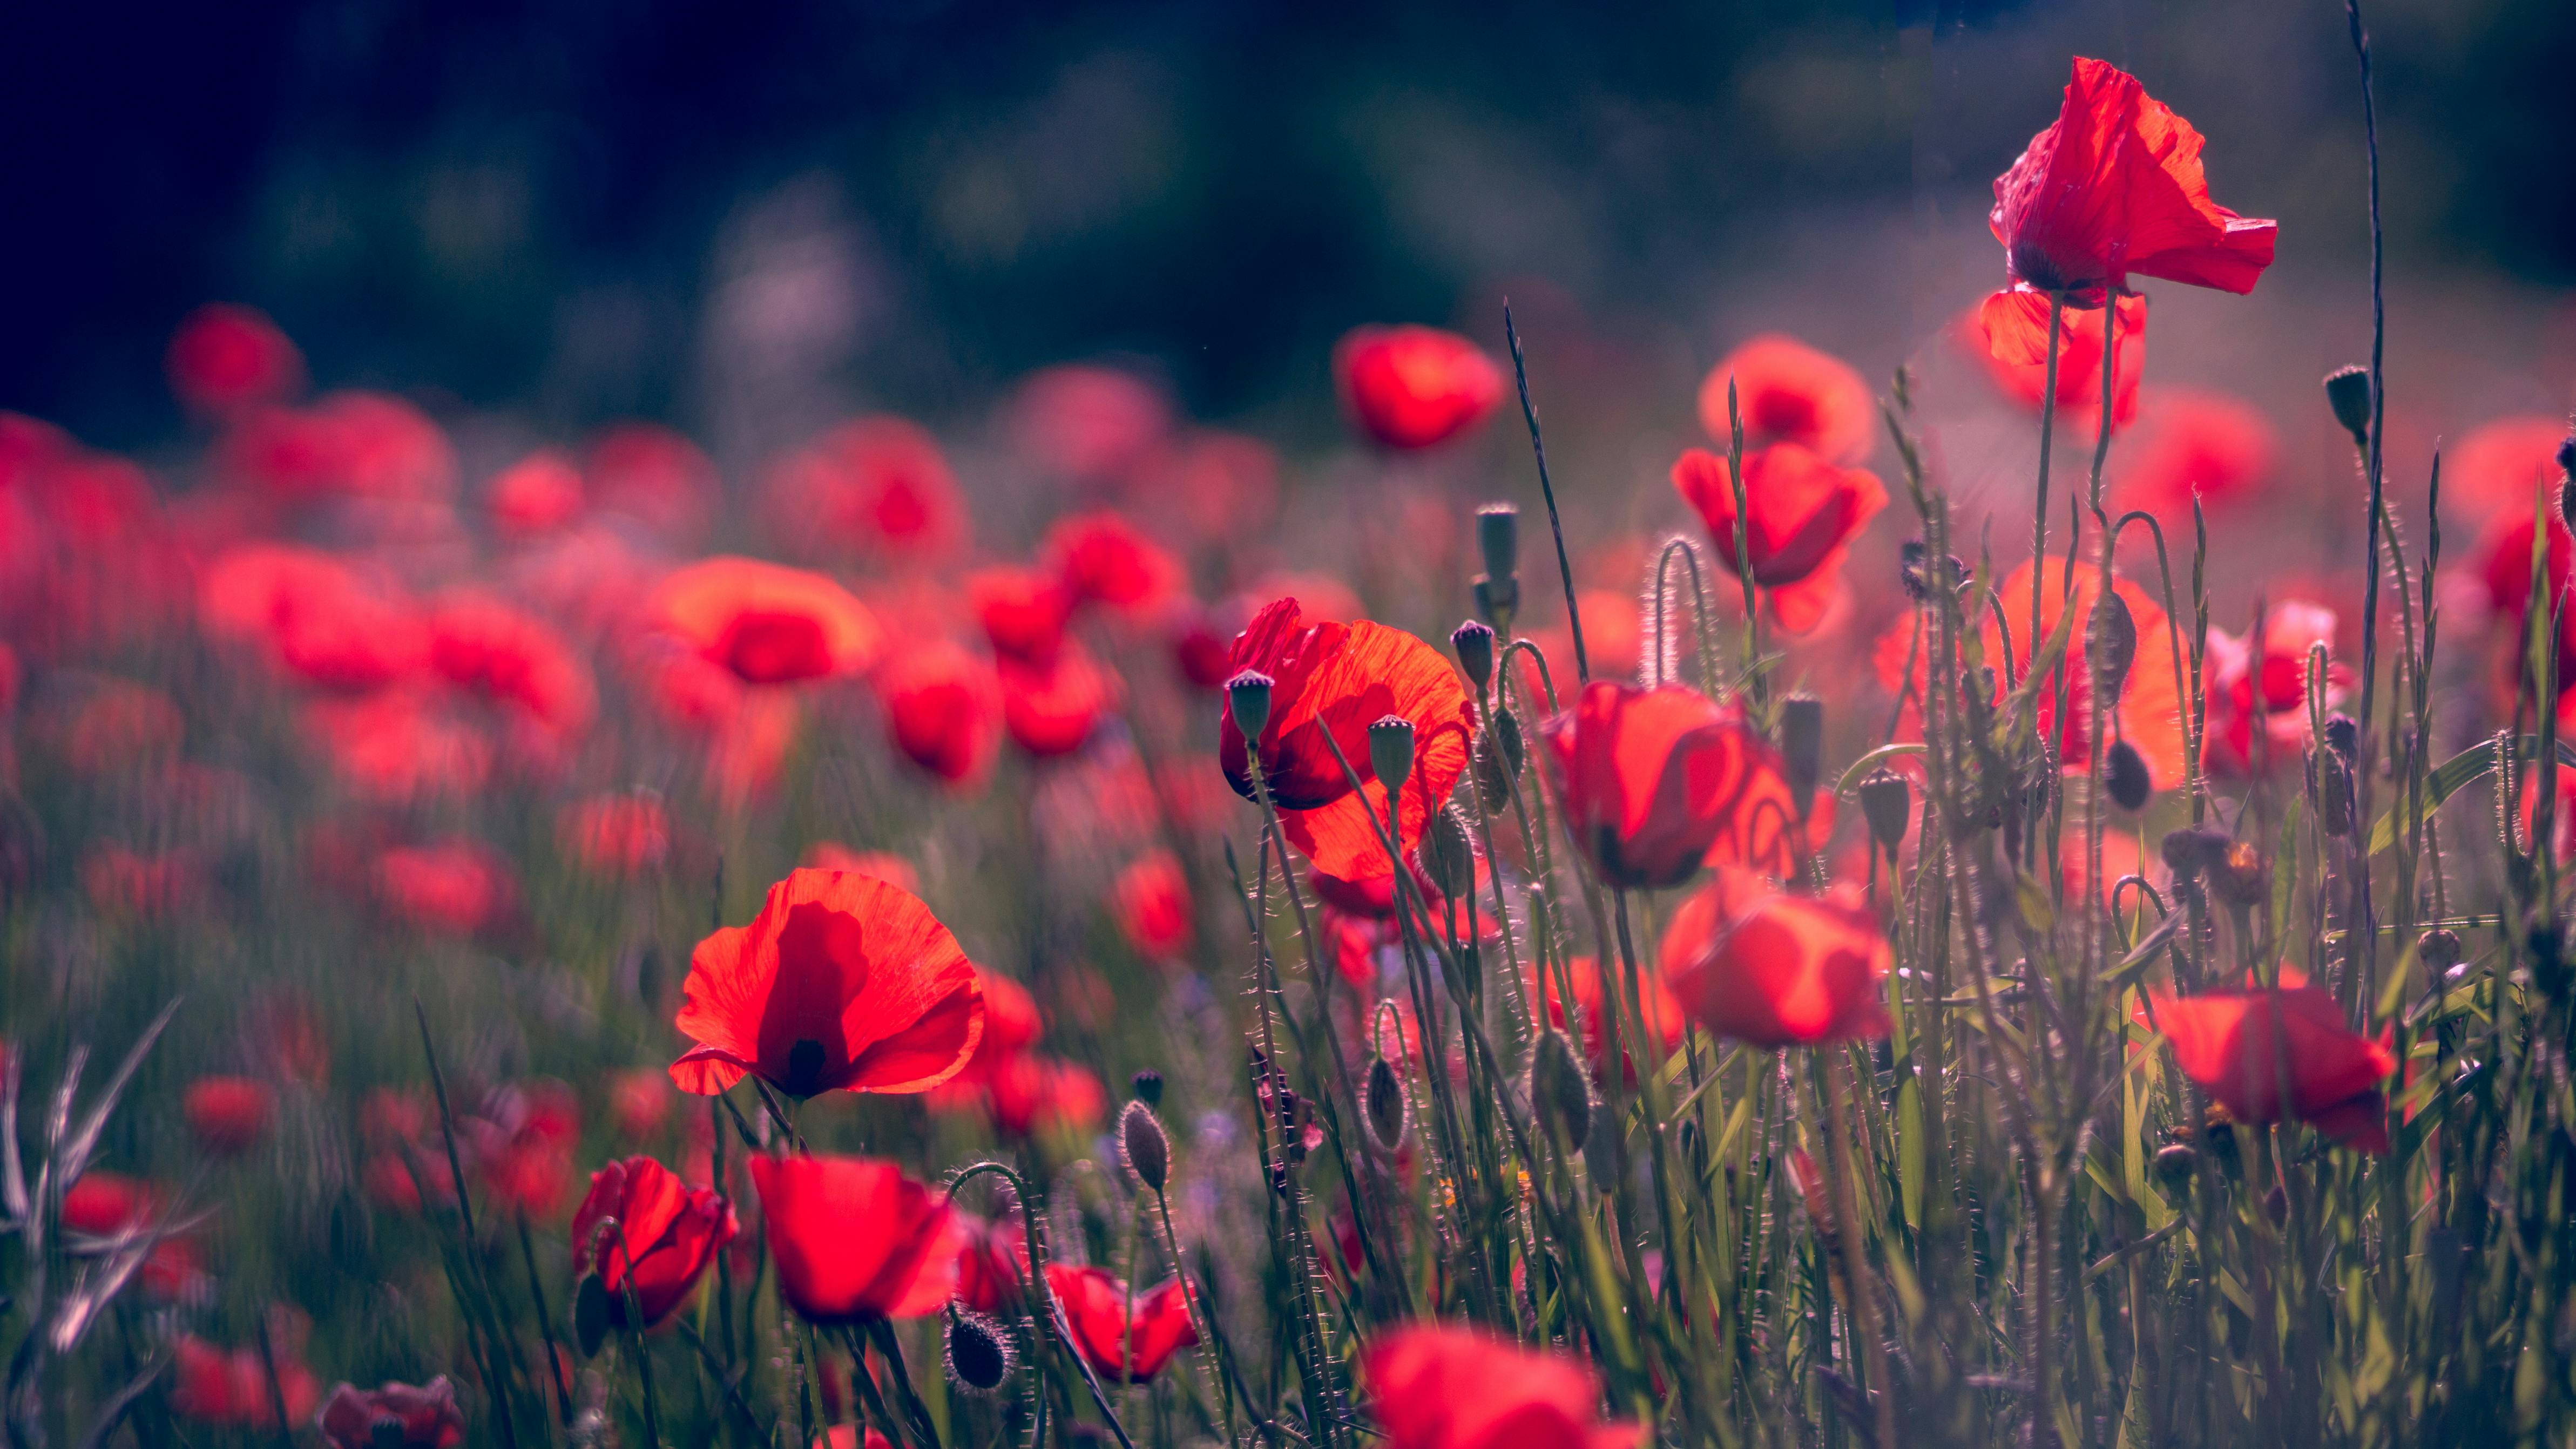 Download The BEST Free Red Flowers Stock Photos & HD Images